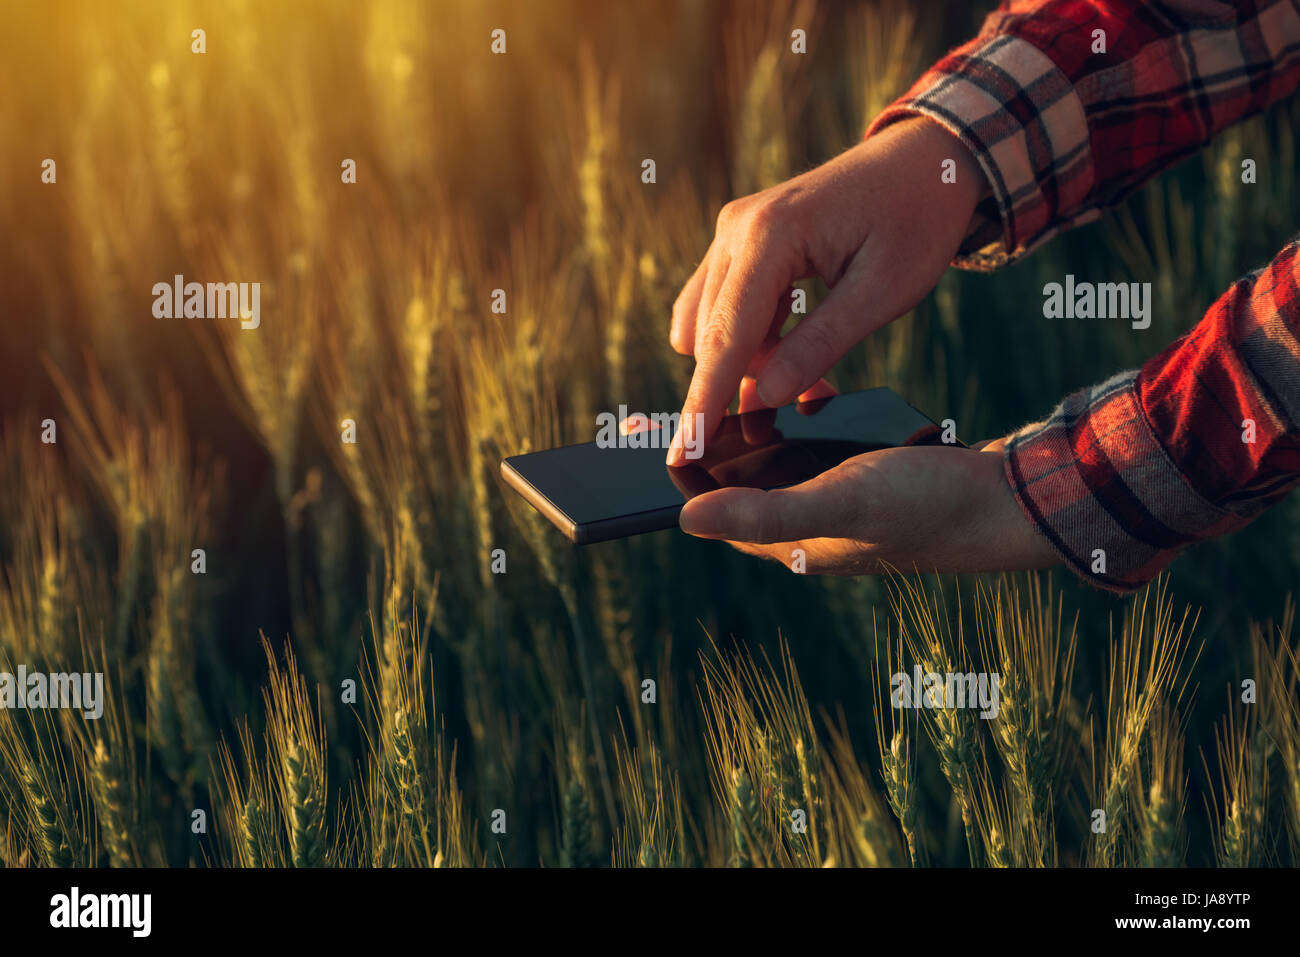 Agronomist using smart phone app to analyze crop development, female hands with mobile phone in cultivated wheat field Stock Photo